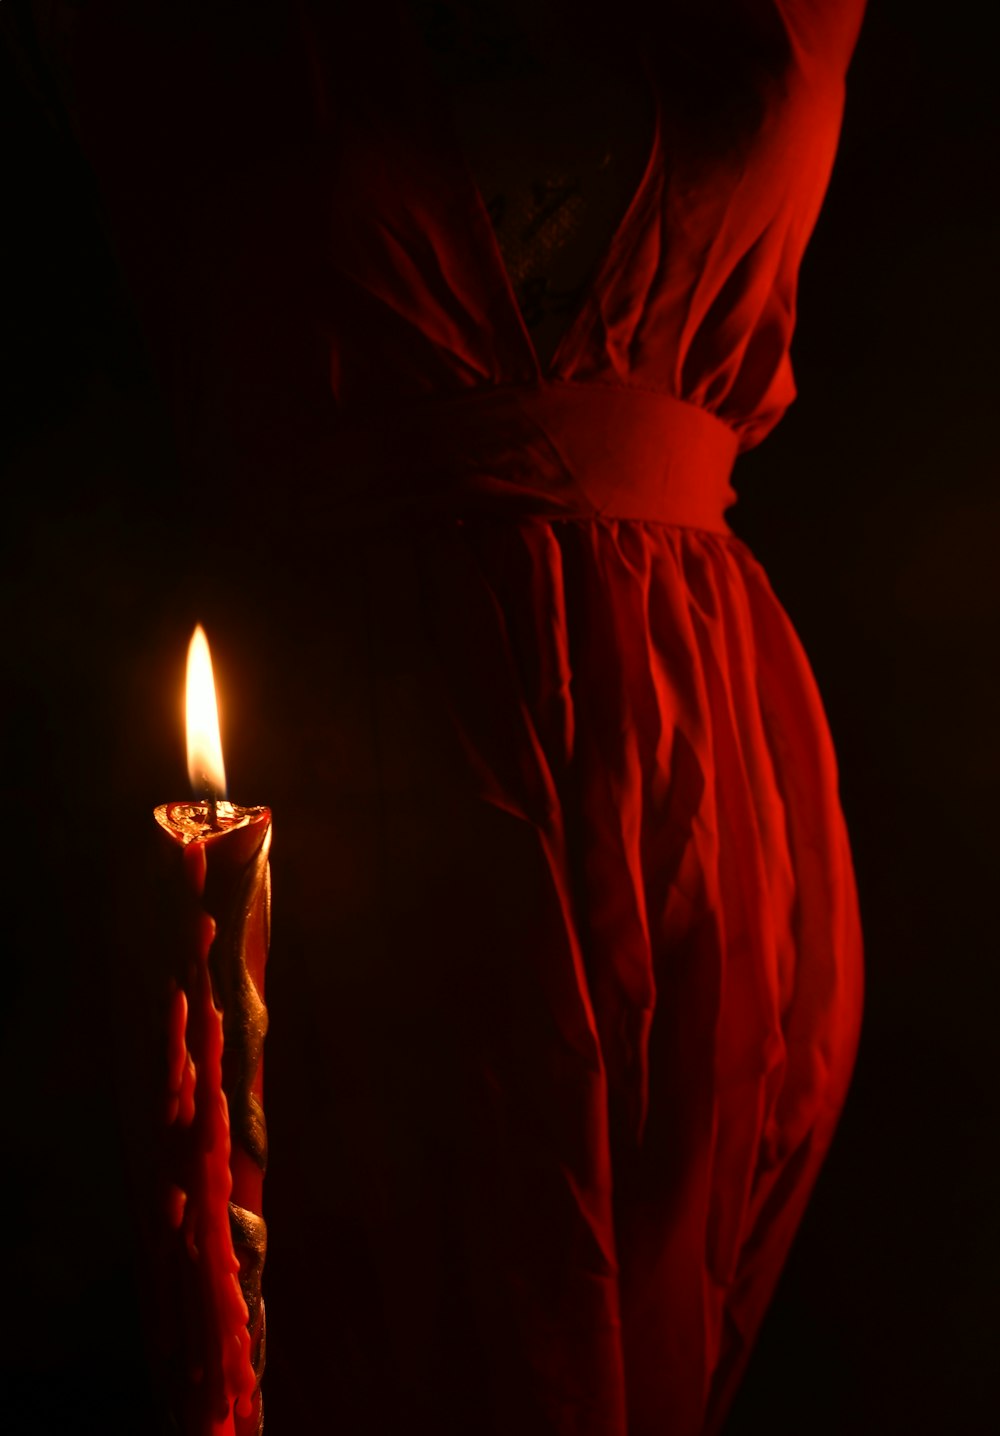 lighted candle near red textile